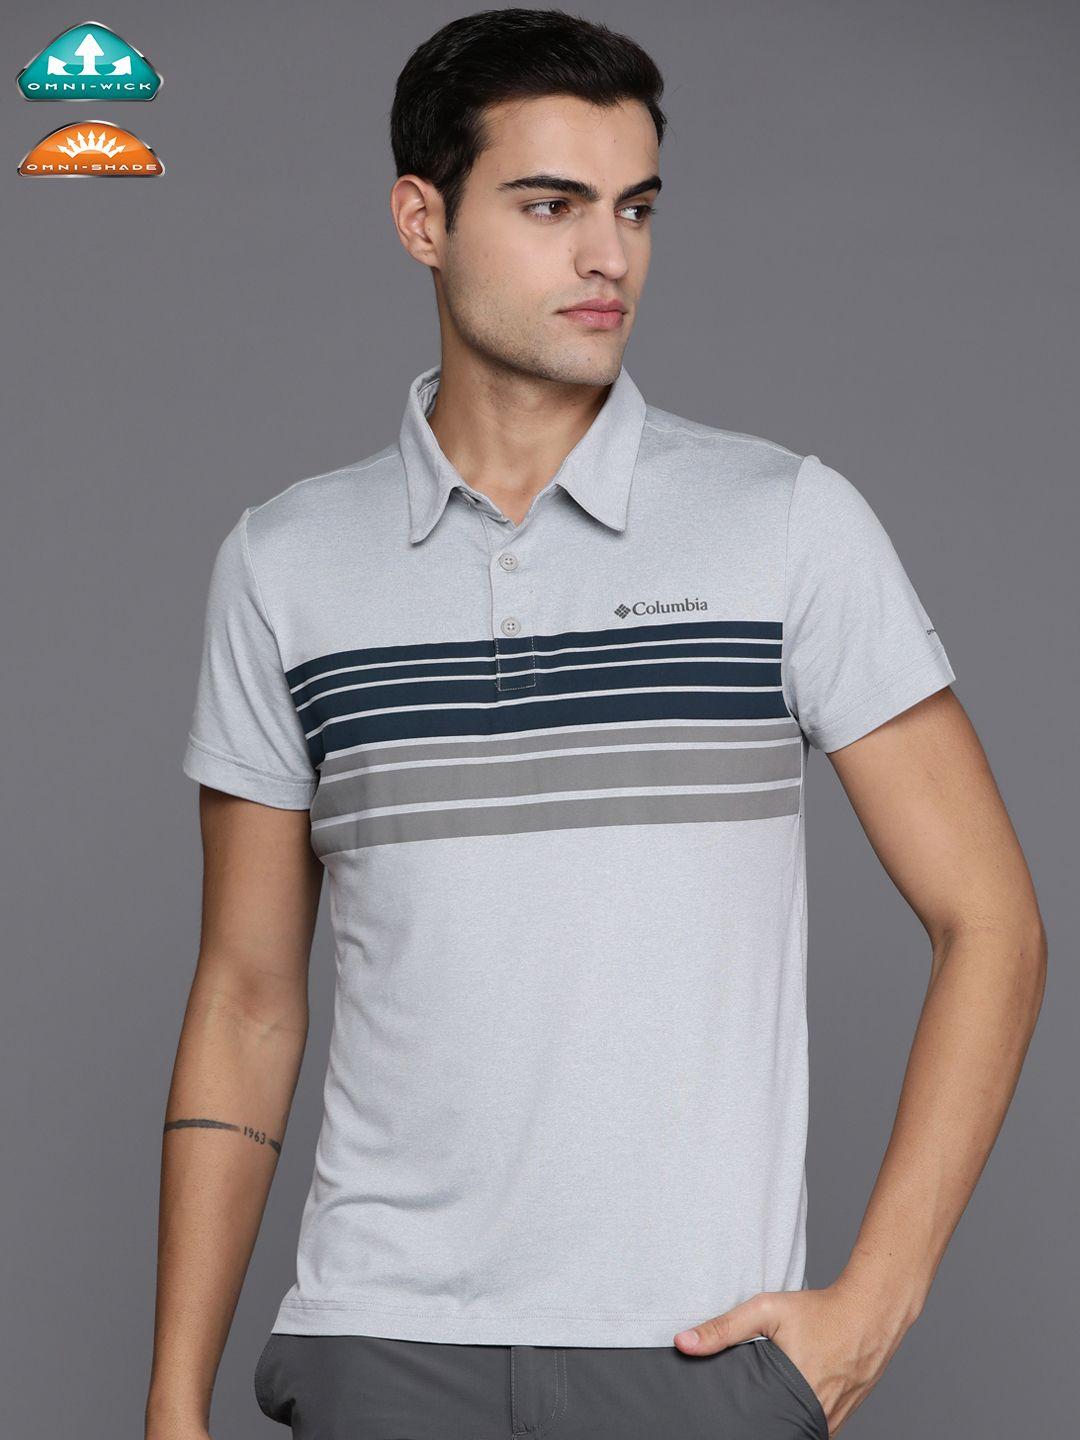 columbia striped slim fit tech trail novelty polo t-shirt